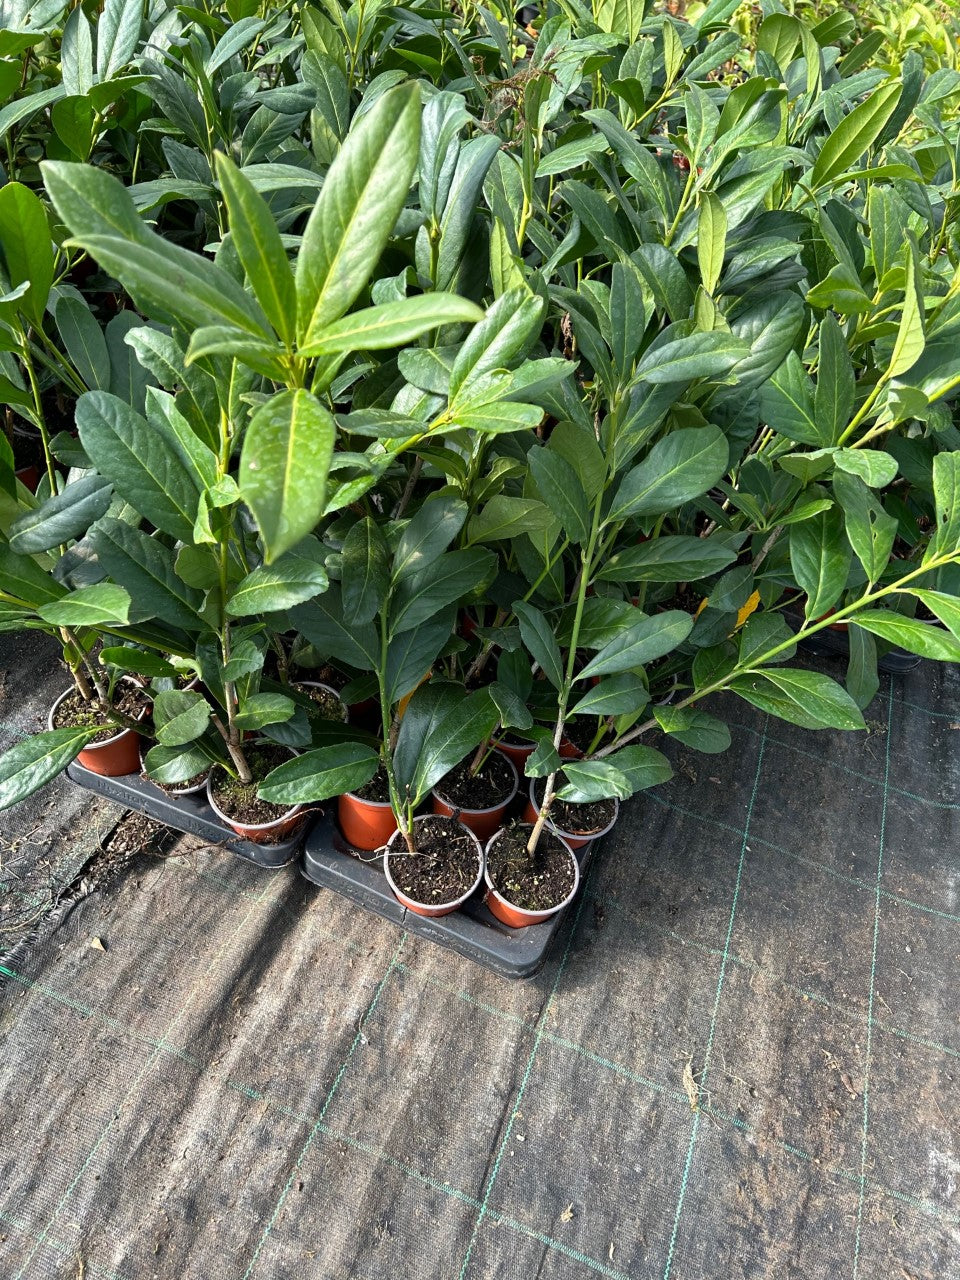 30 Cherry Laurel Hedging apx 25-40cm in Pots - Great Quality